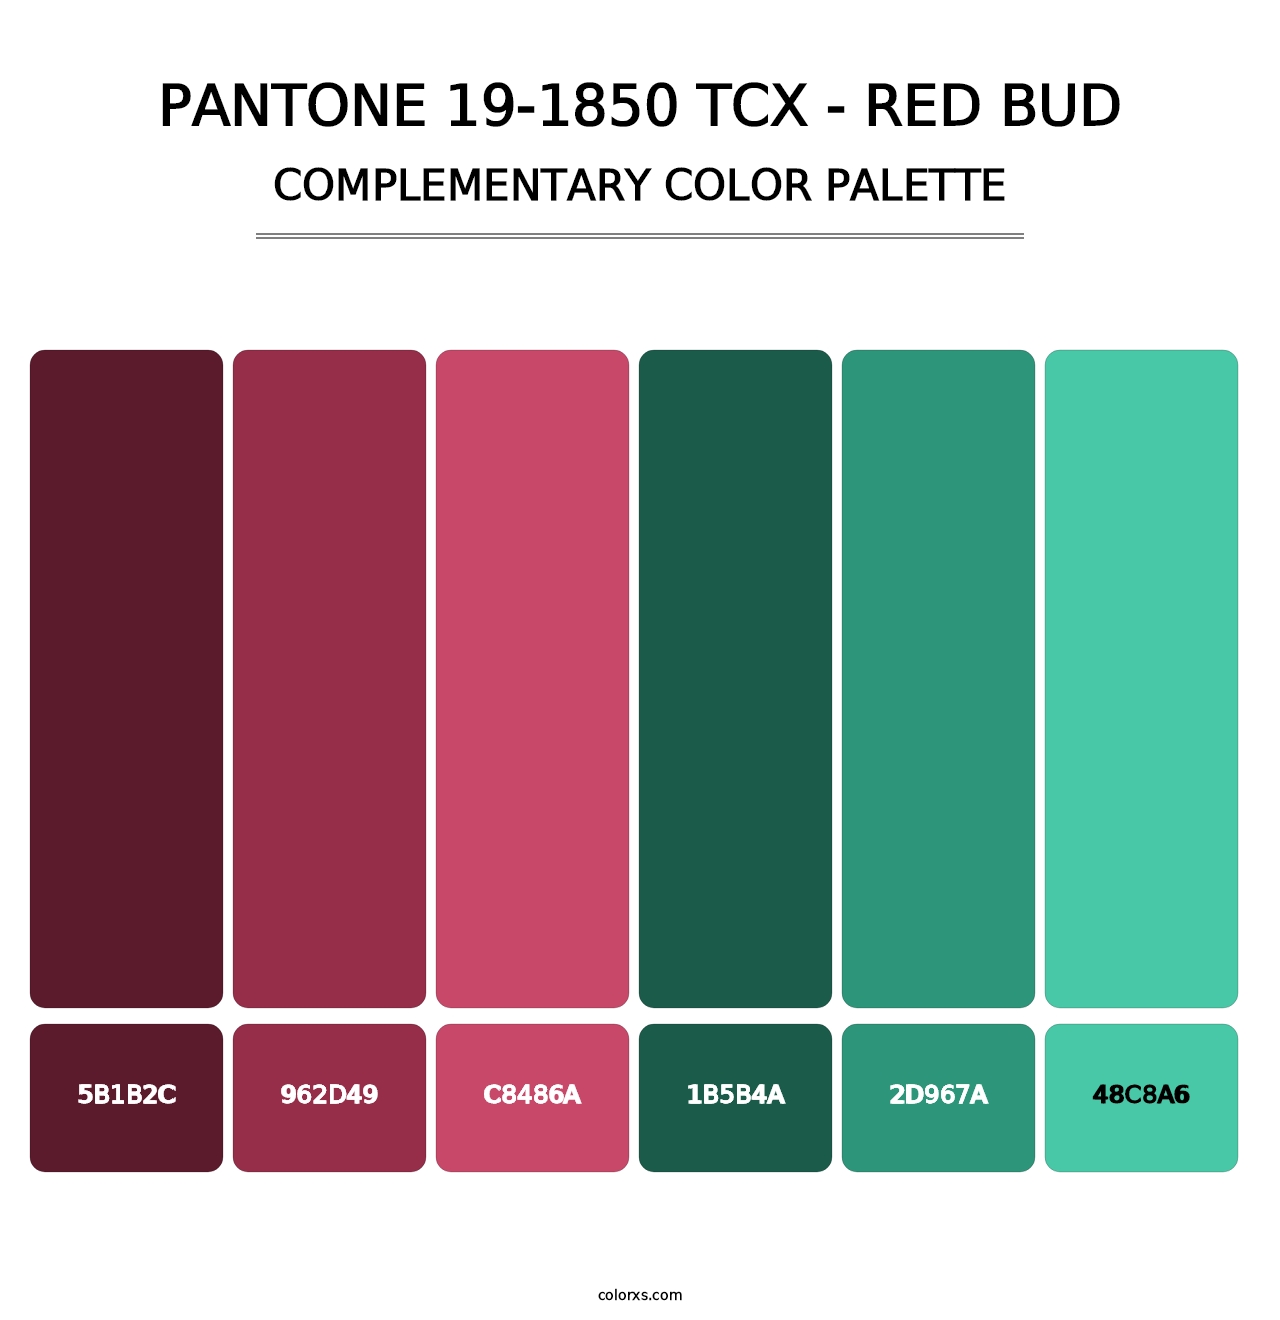 PANTONE 19-1850 TCX - Red Bud - Complementary Color Palette